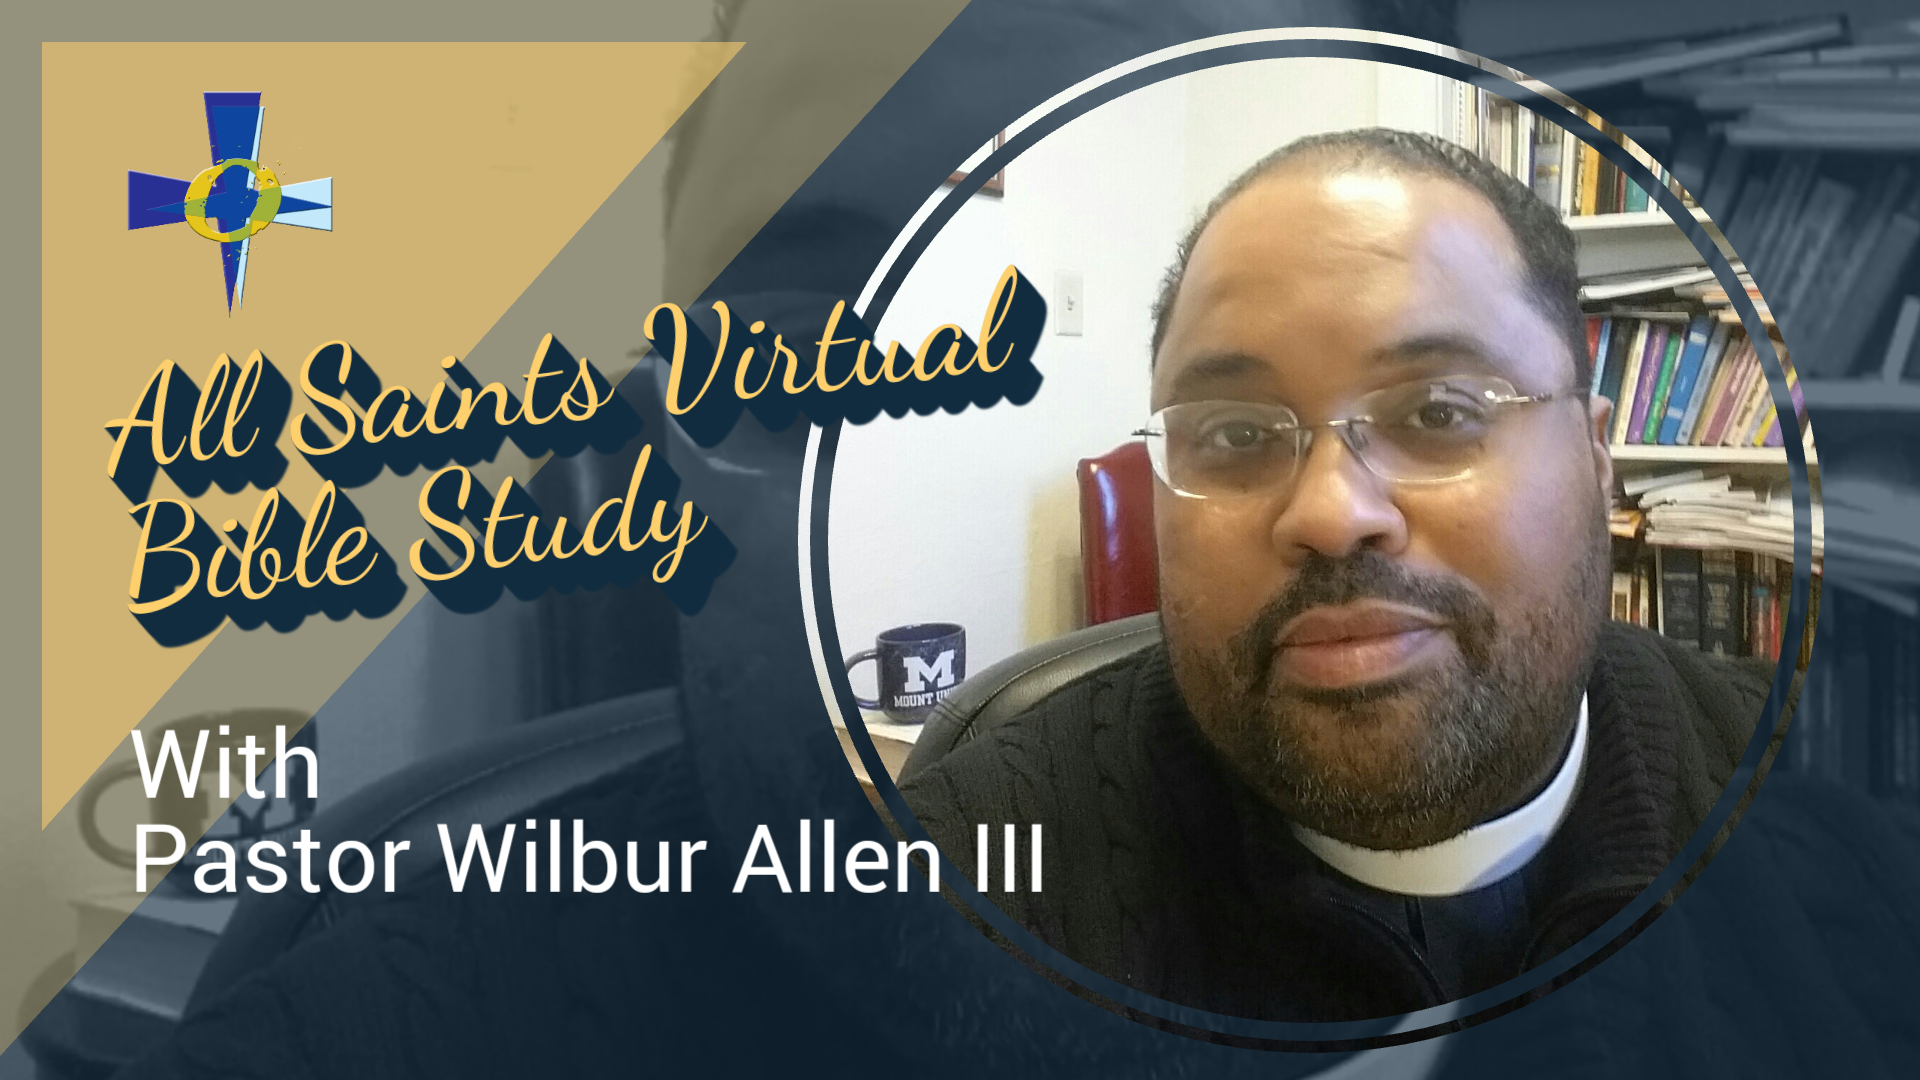 All Saints Virtual Bible Study - The Pride of a Nation